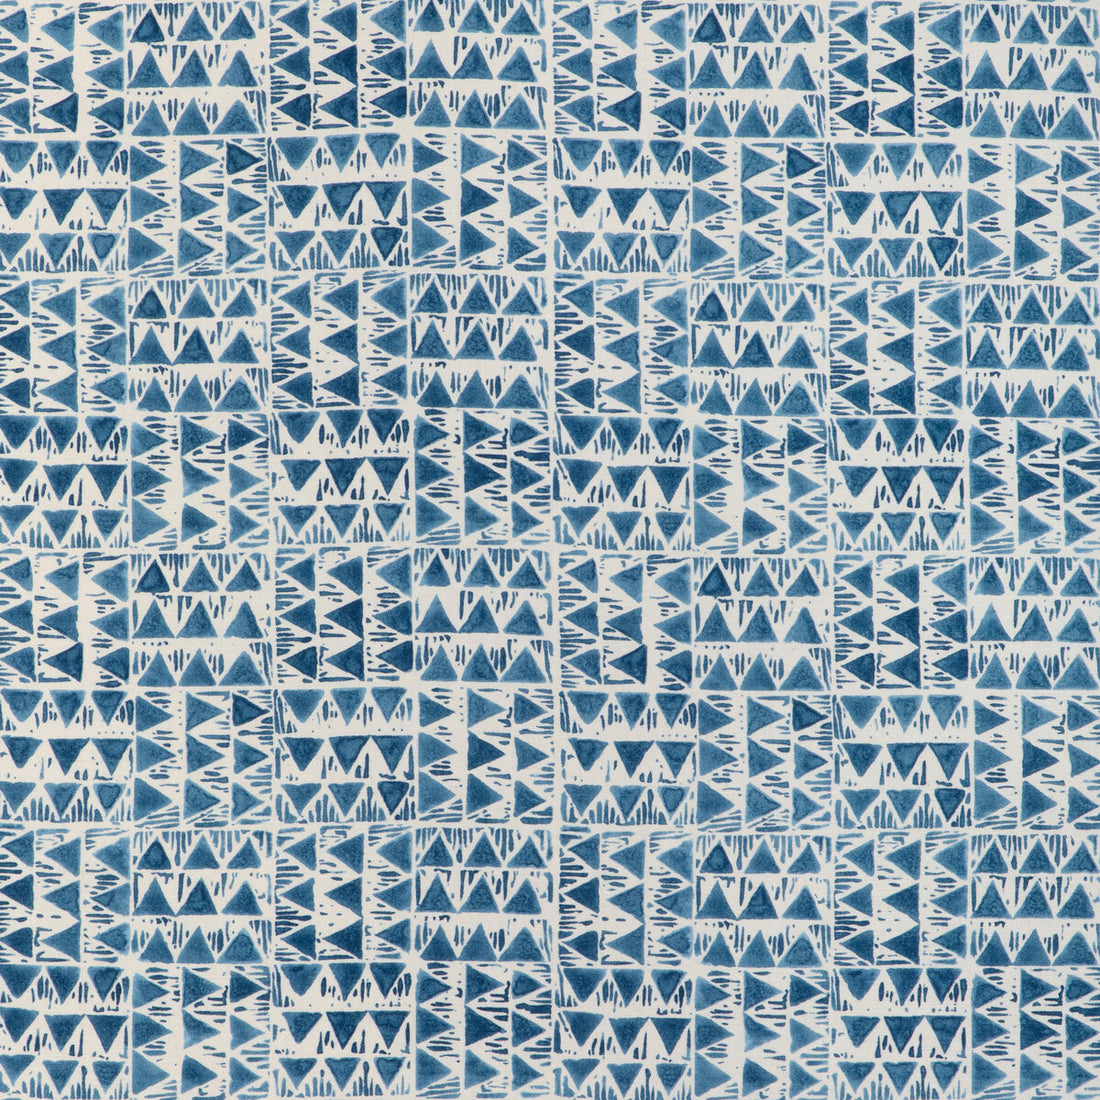 Yampa Print fabric in bay color - pattern 2020210.5.0 - by Lee Jofa in the Clare Prints collection